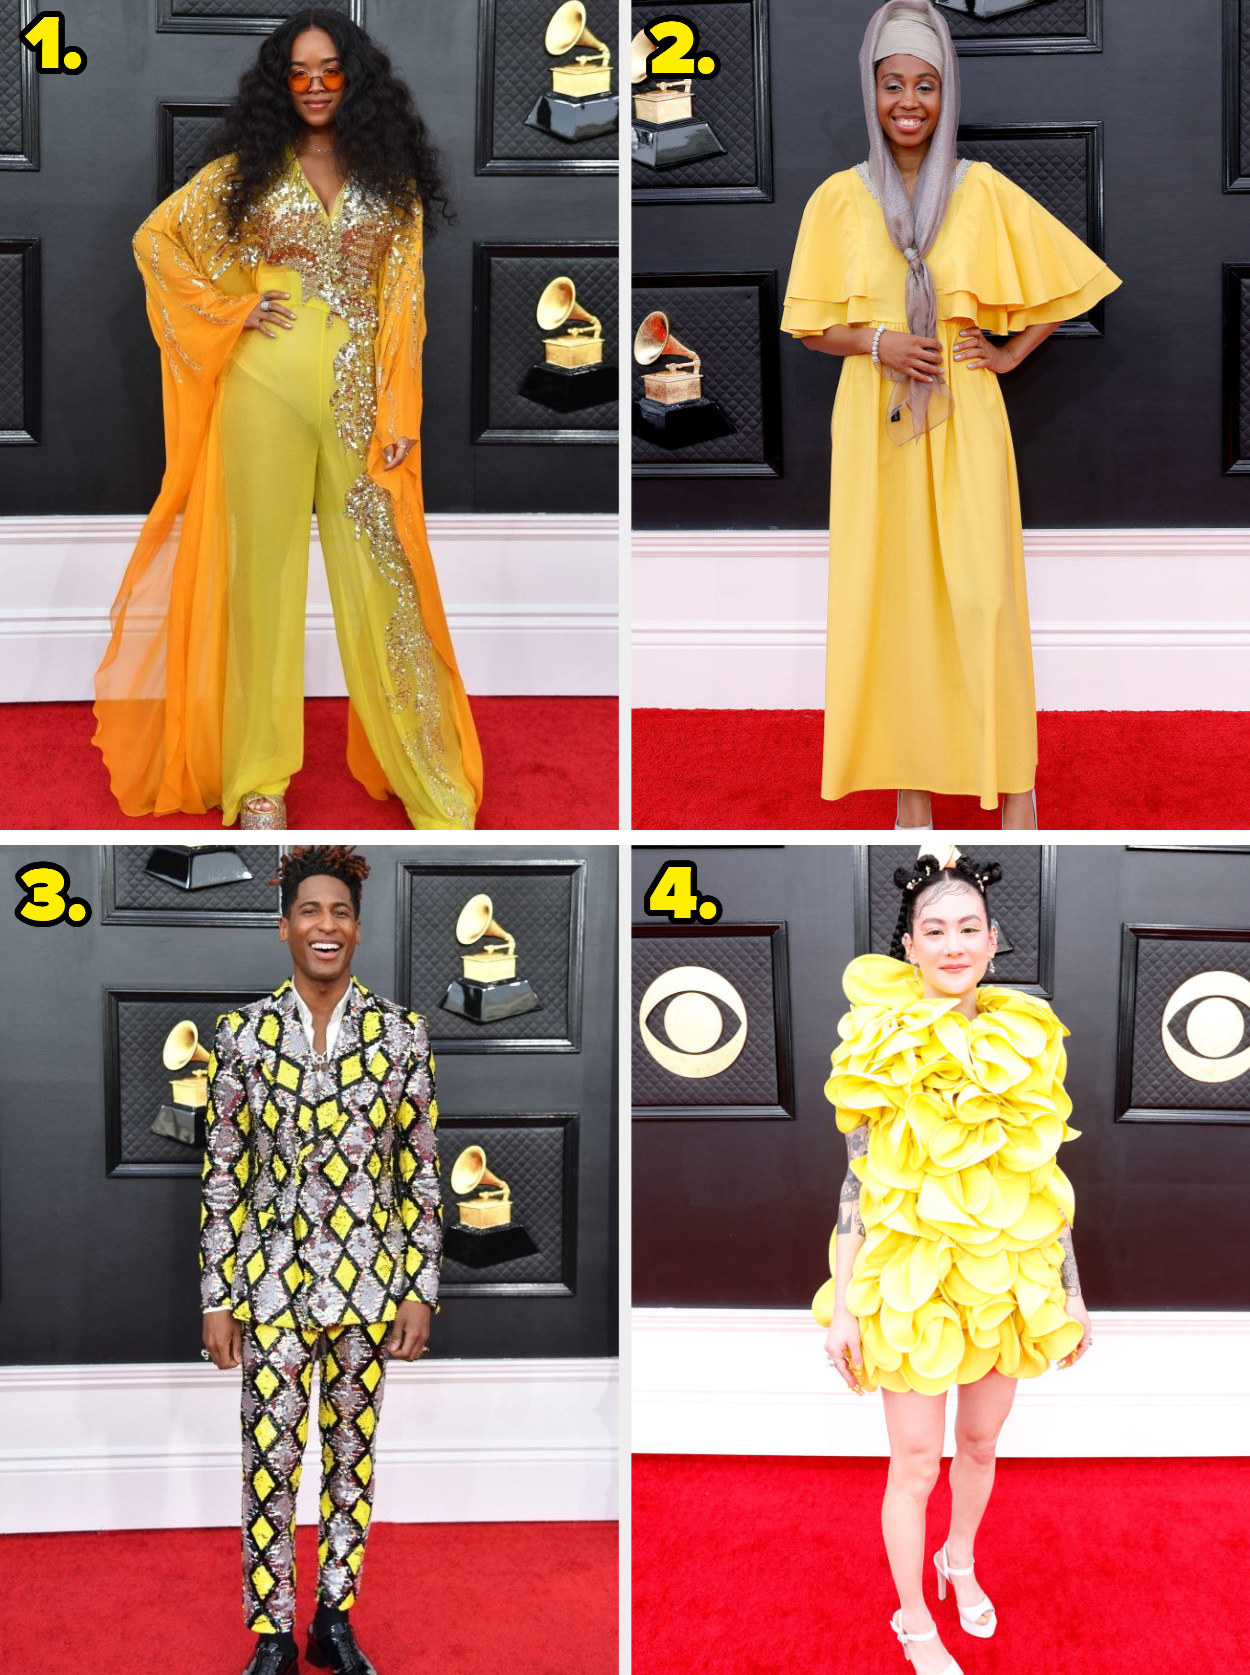 1. A long-sleeved jumpsuit with sequin embellishments and huge bell sleeves. 2. A tiered gown with a headscarf. 3. A printed suit with sequins. 4. A short dress that has ruffles that imitate flower petals.